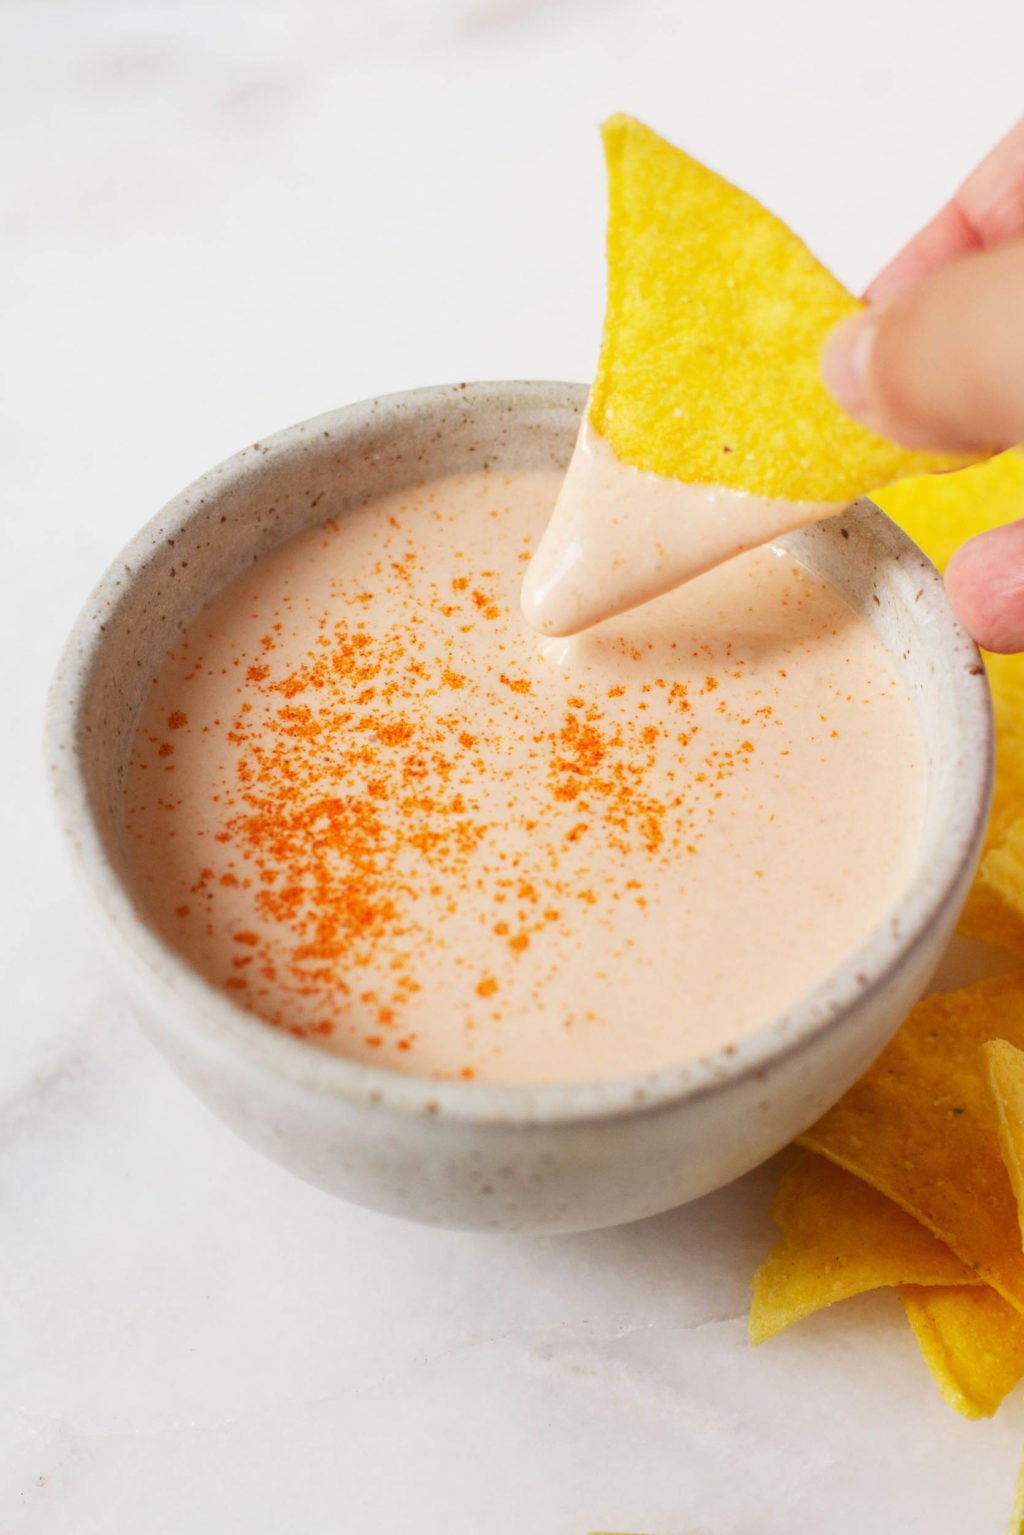 A triangular corn chip is being dipped into a small pinch bowl of a creamy, plant-based sauce.